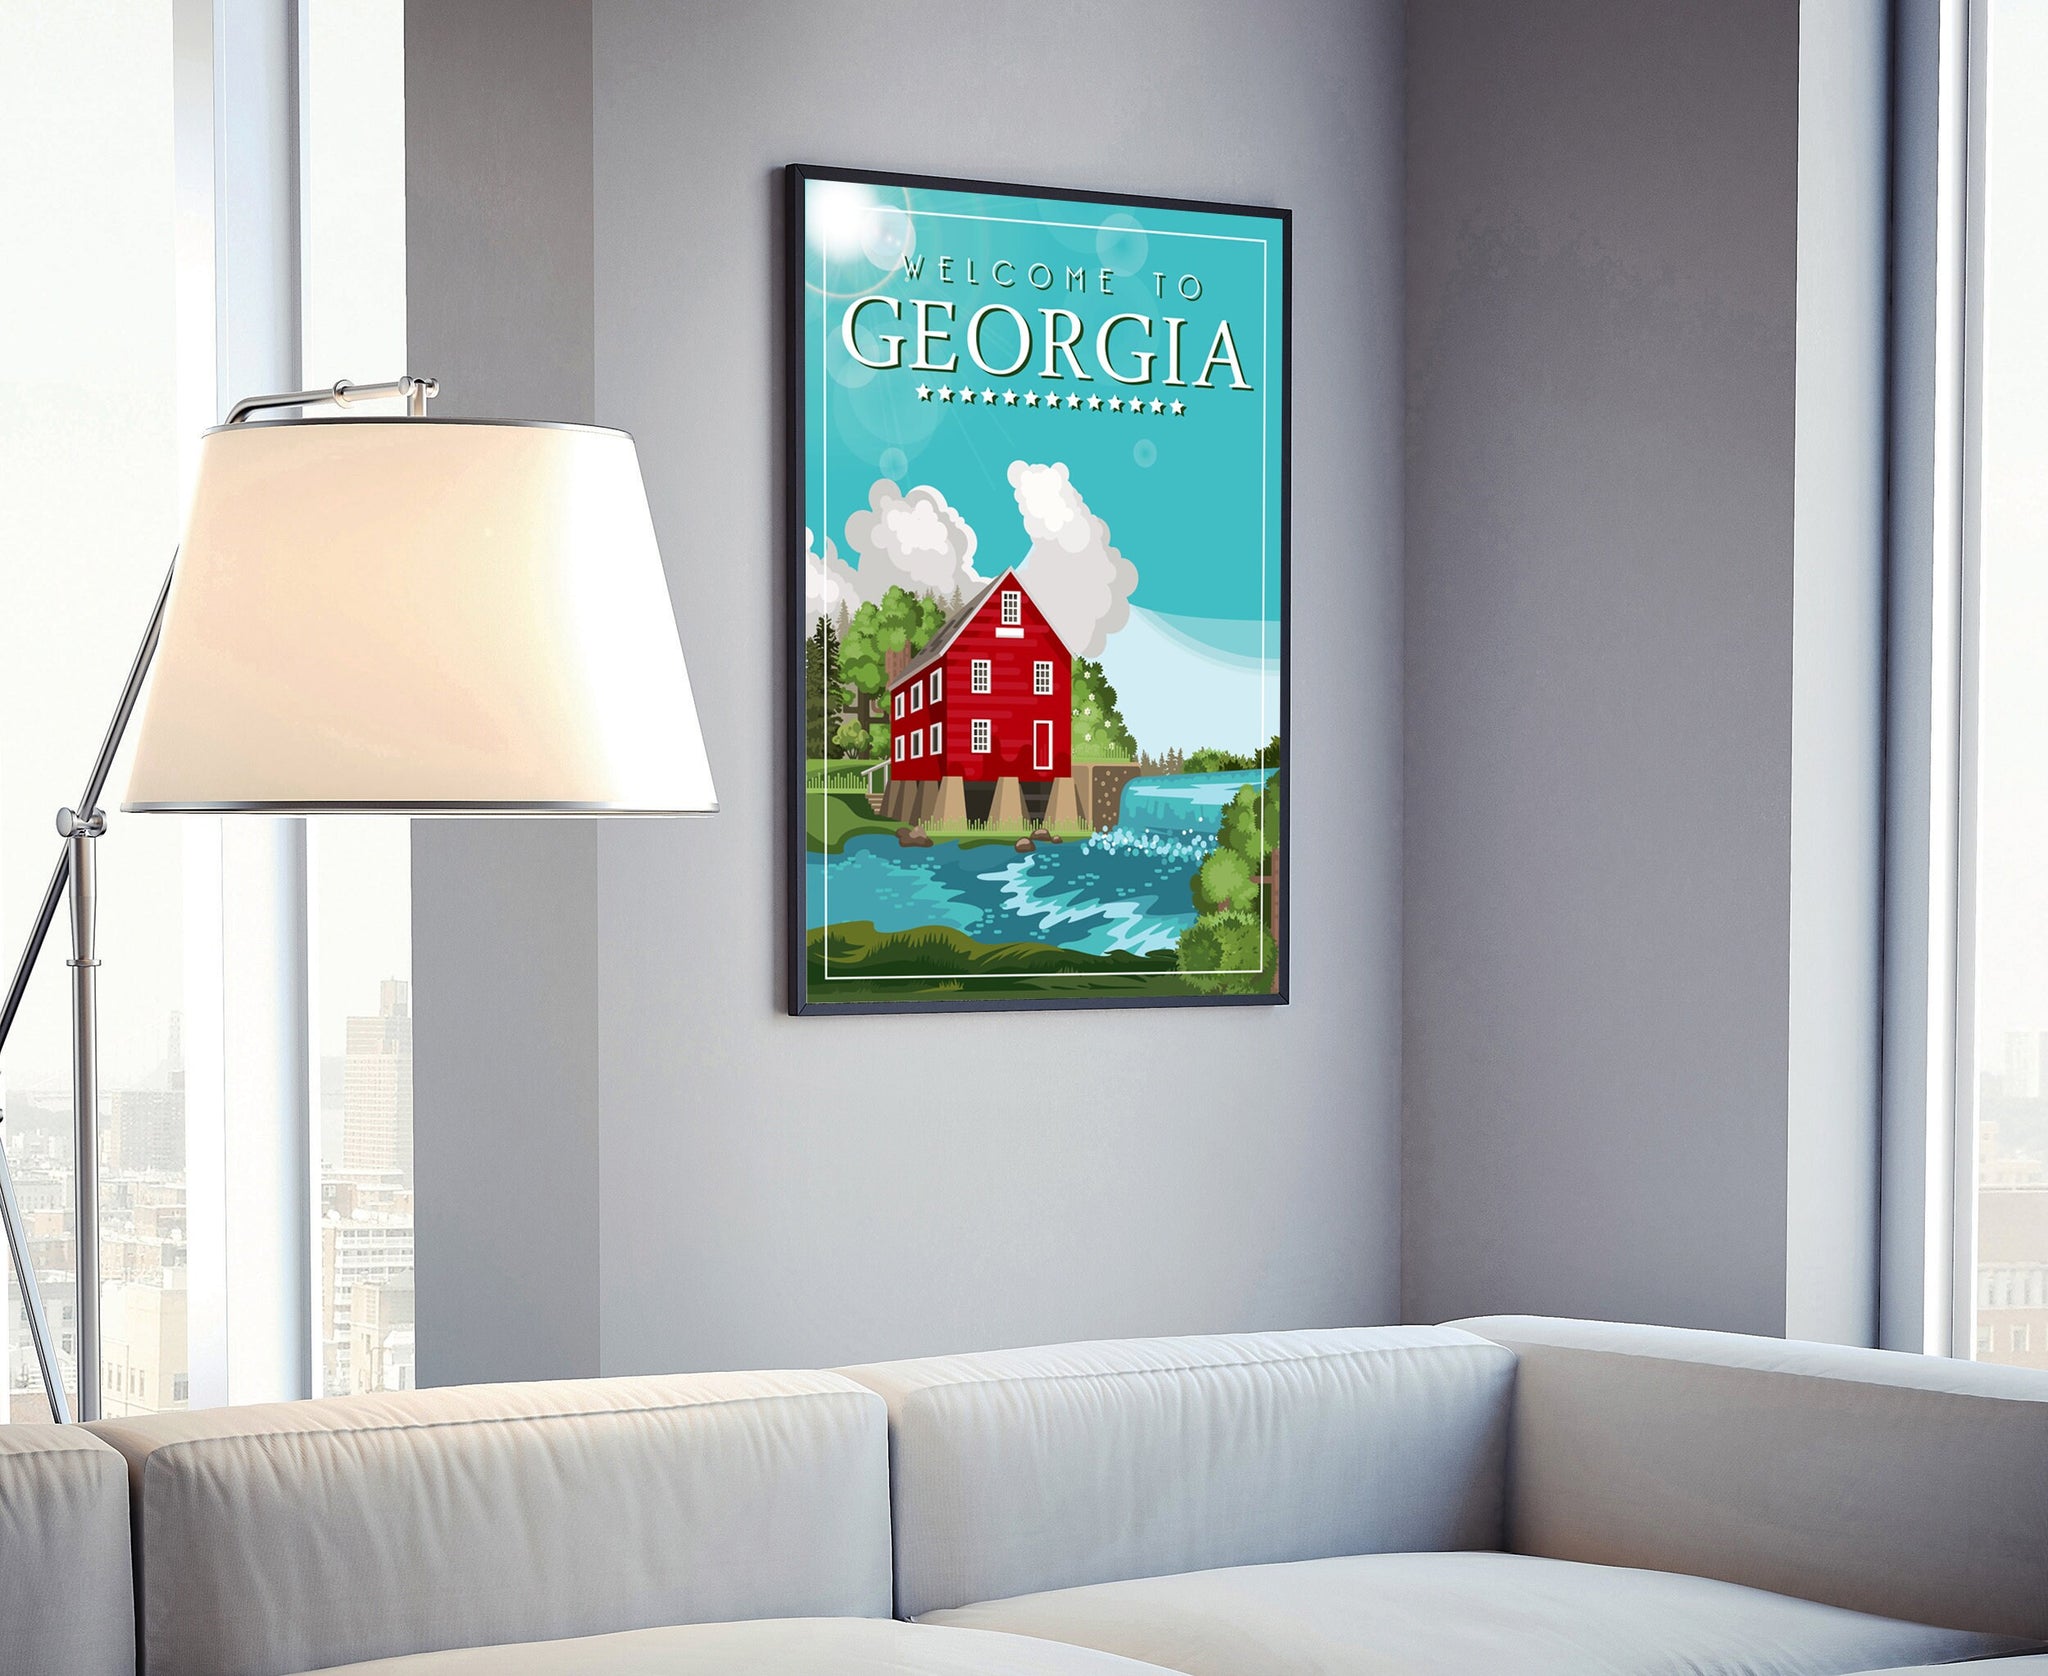 Retro Style Travel Poster, Georgia Vintage Rustic Poster Print, Home Wall Art, Office Wall Decor, Posters, Georfia, State Map Poster Prints